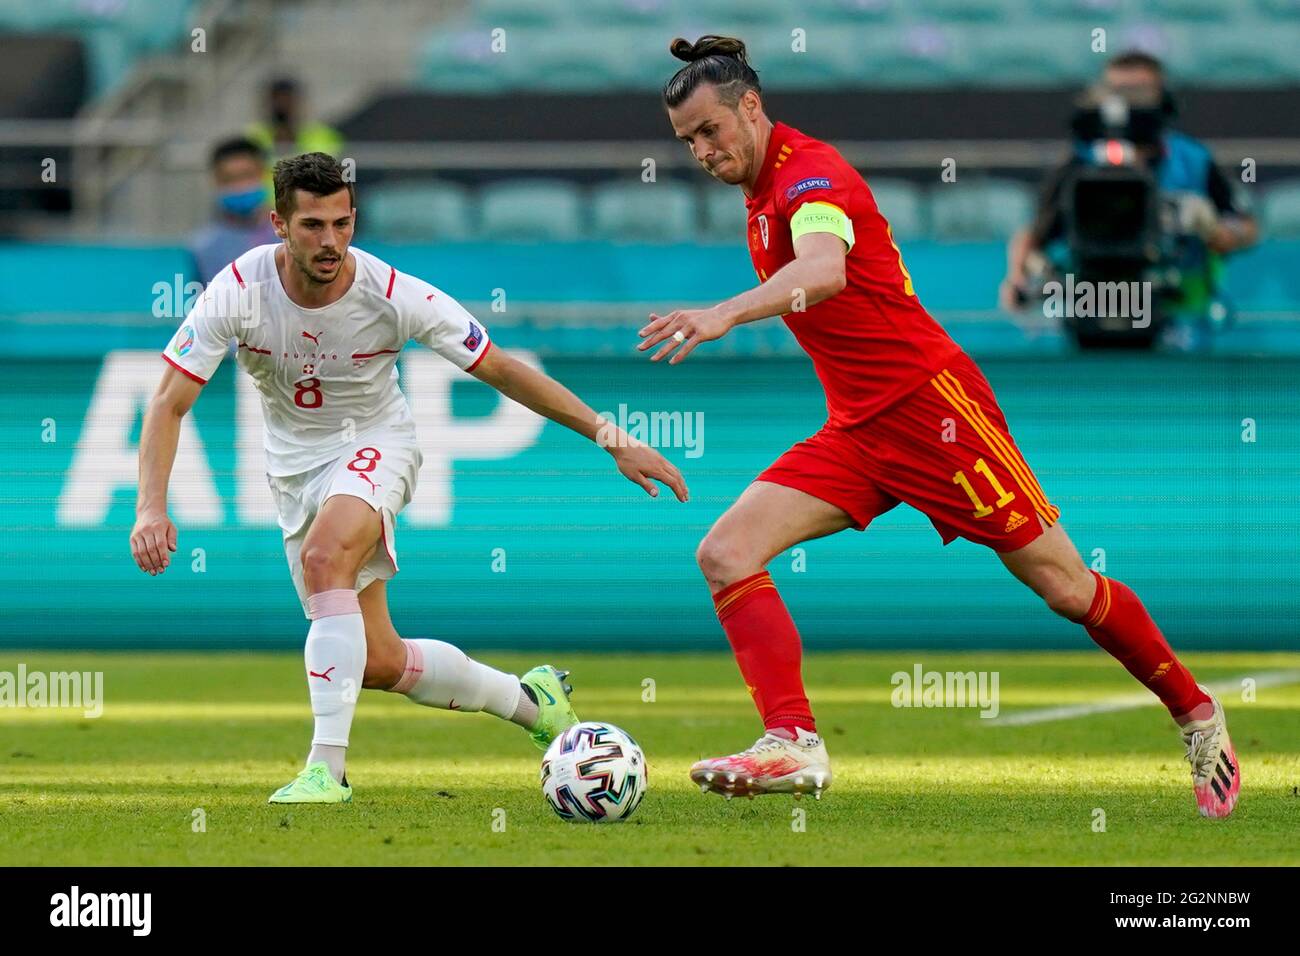 Wales' Gareth Bale up against Switzerland's Remo Freuler during the UEFA Euro 2020 Group A match at the Baku Olympic Stadium, Azerbaijan. Picture date: Saturday June 12, 2021. Stock Photo